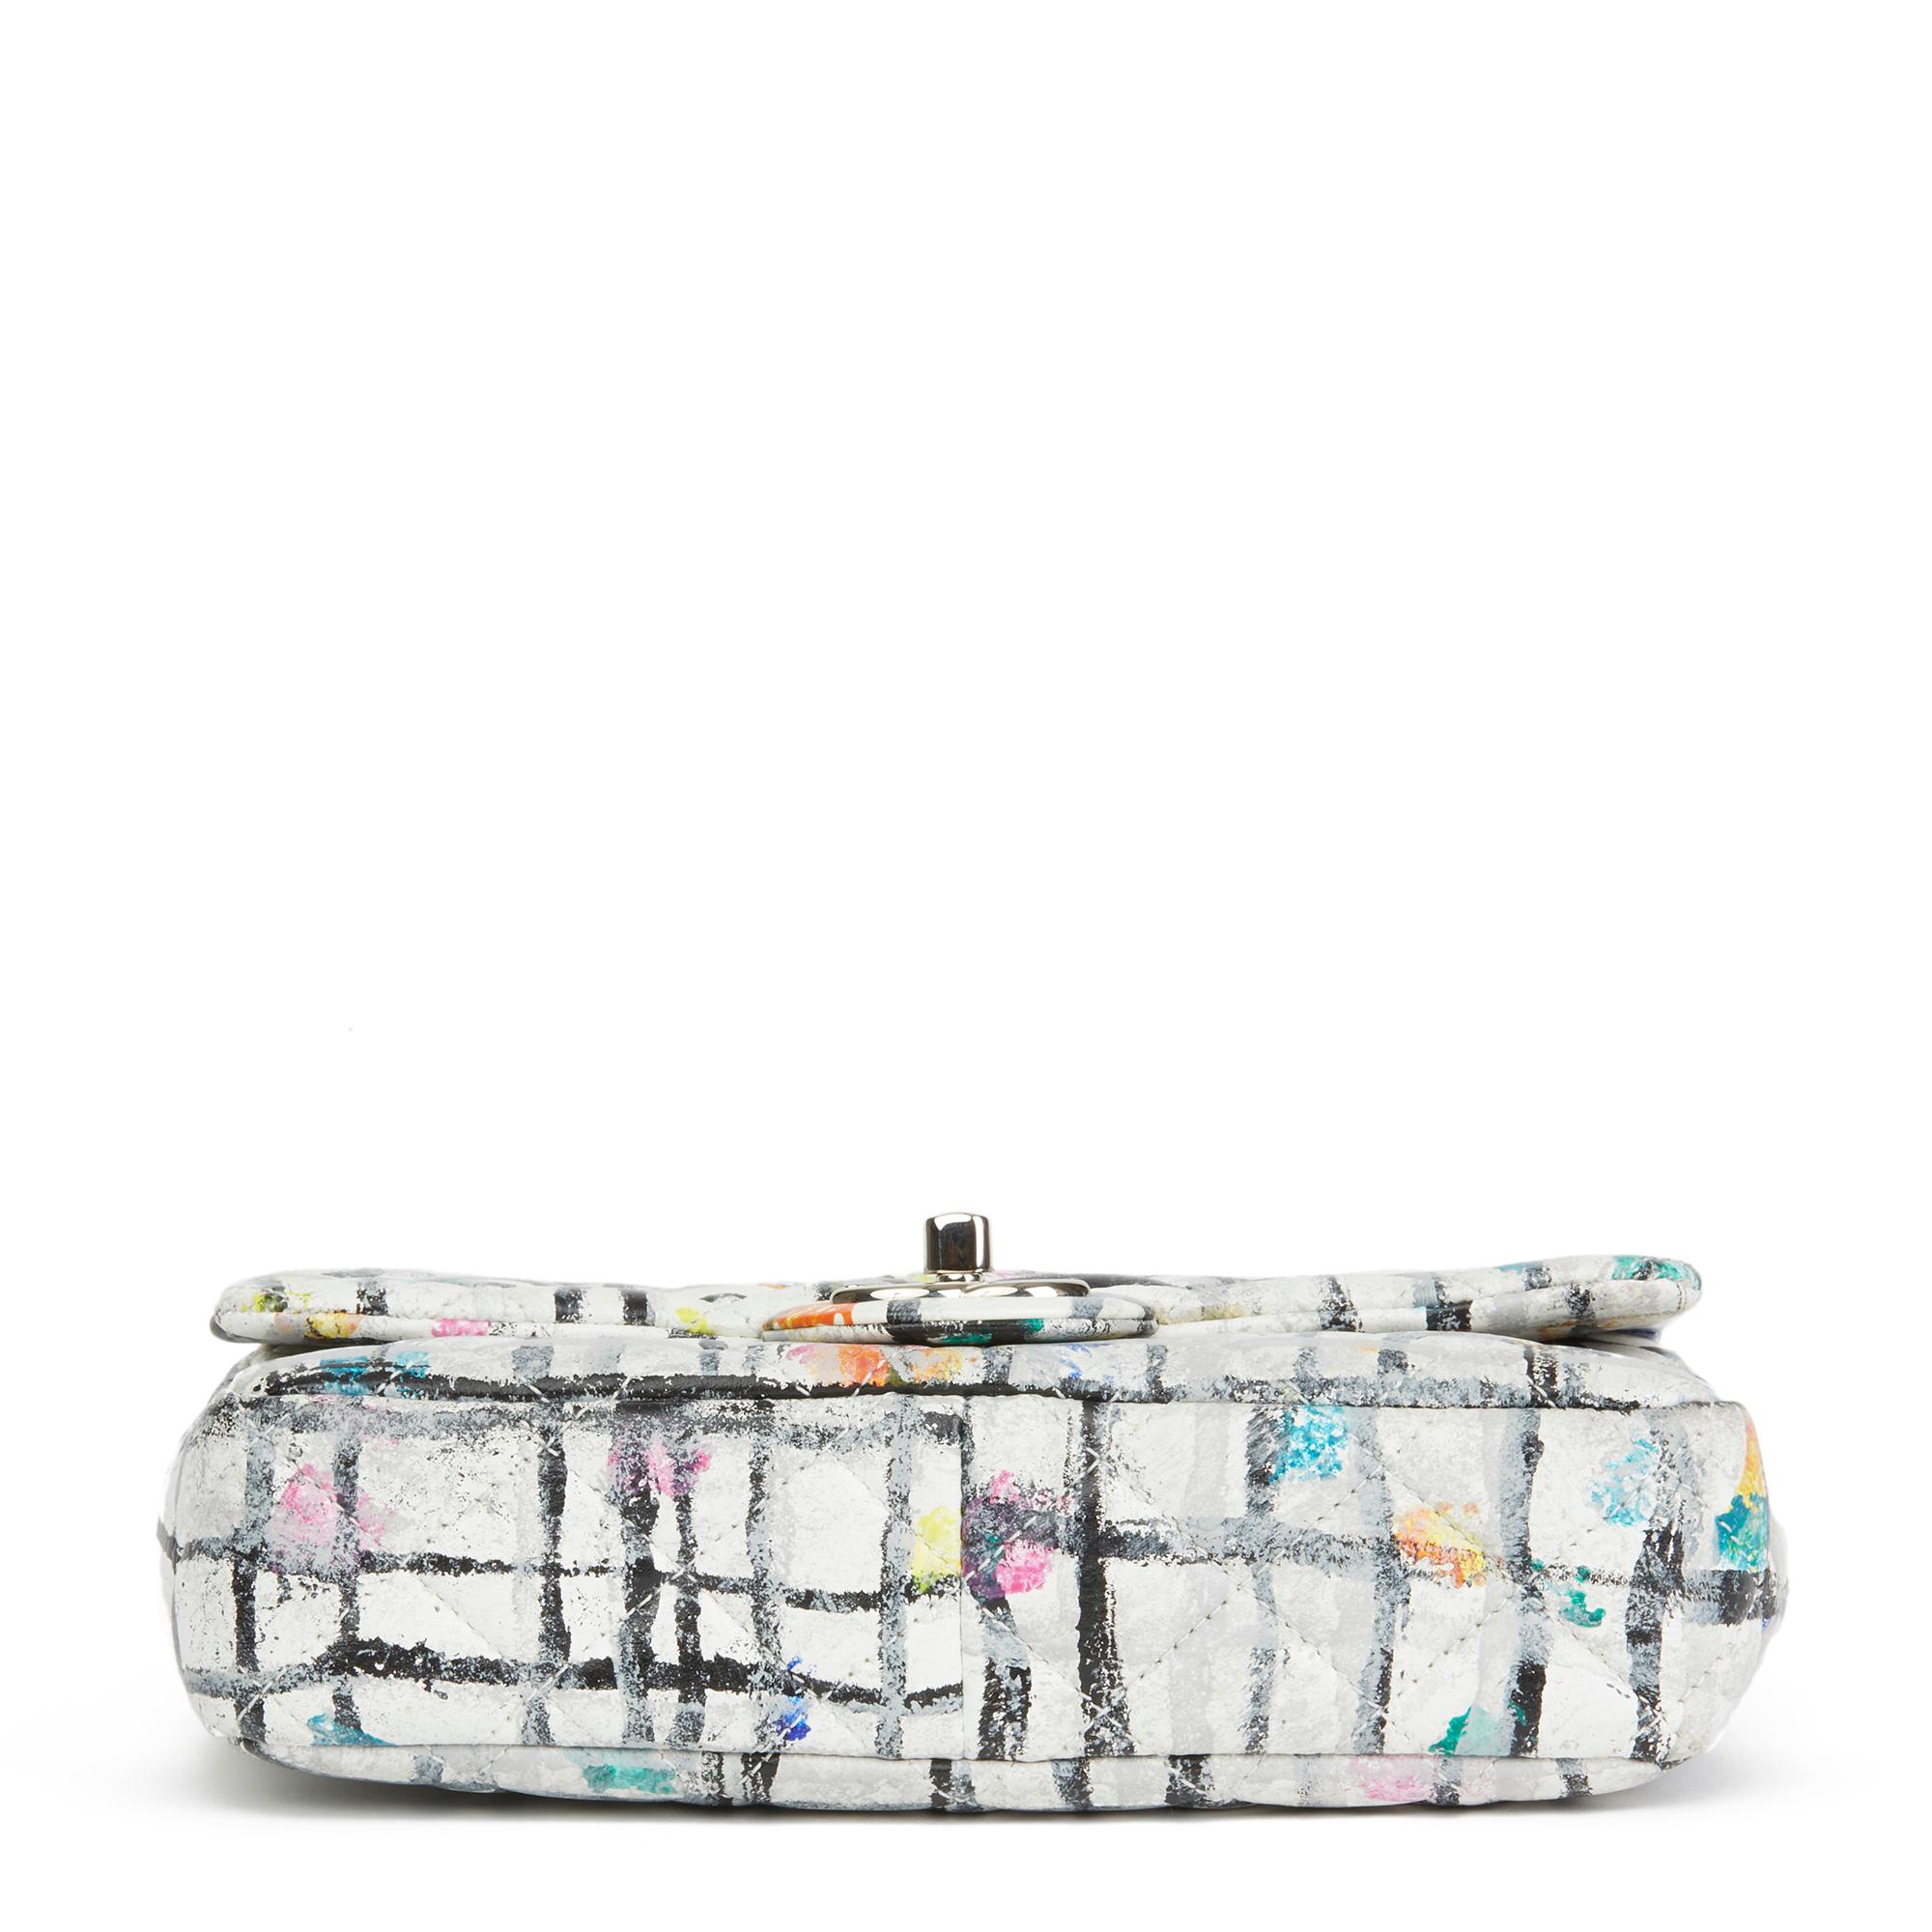 Gray 2014 Chanel Multicolour Hand-painted Quilted Lambskin Graffiti Mini Flap Bag